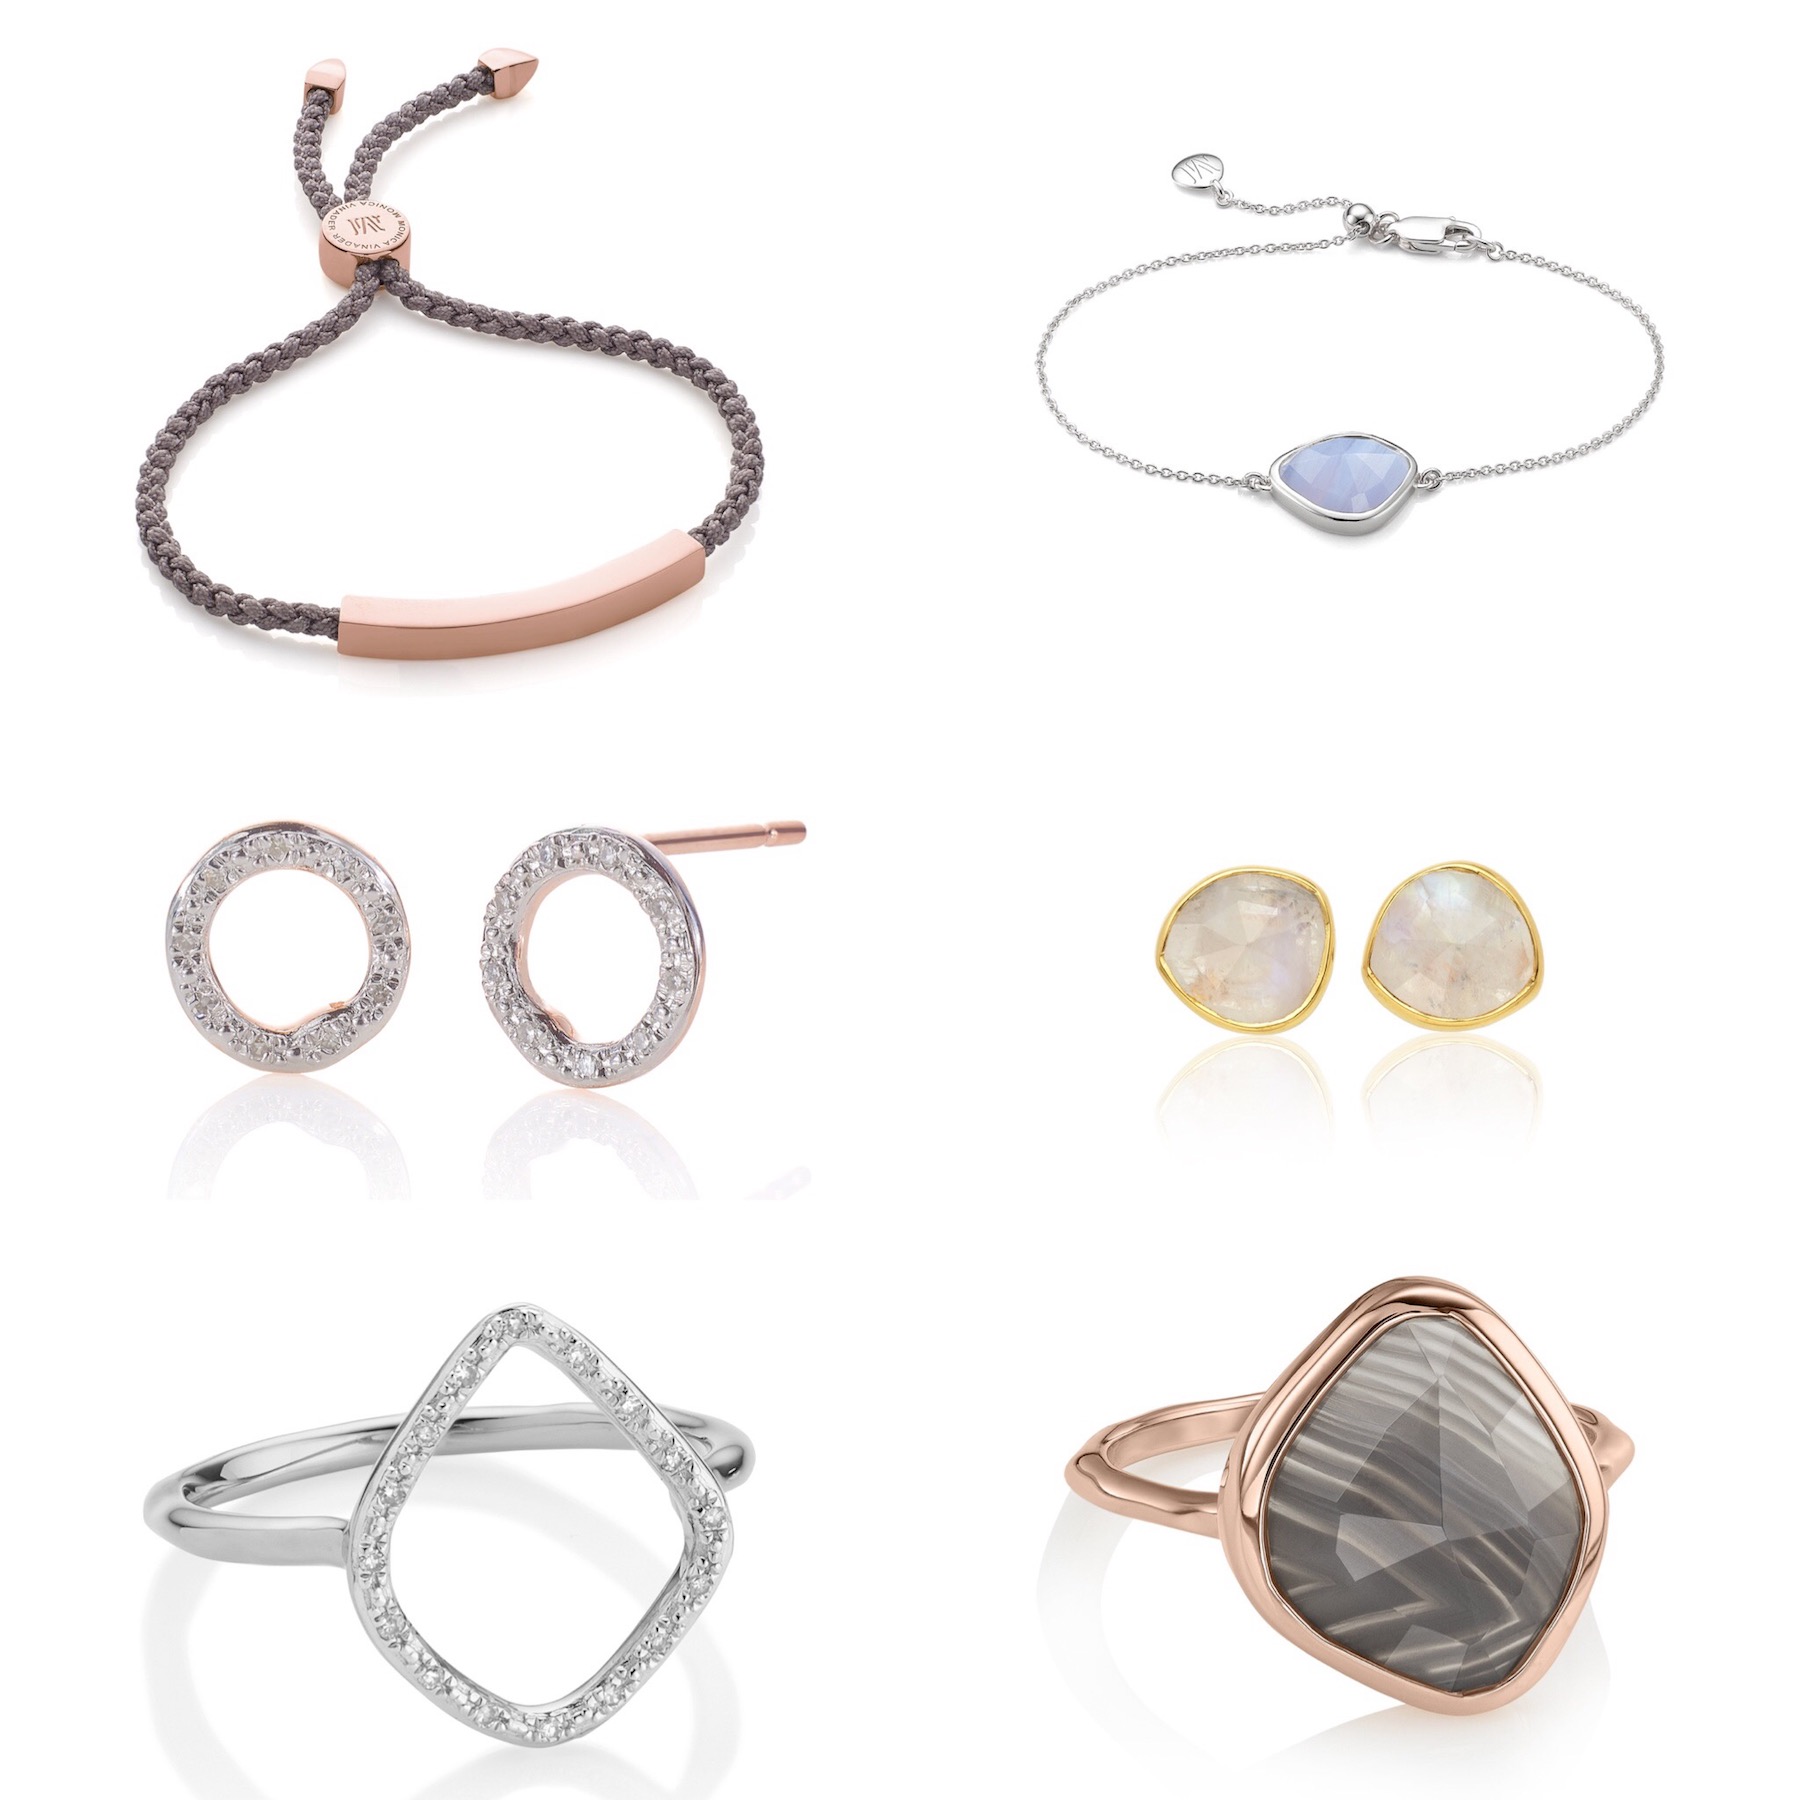 Jewellery Gift Ideas From Monica Vinader